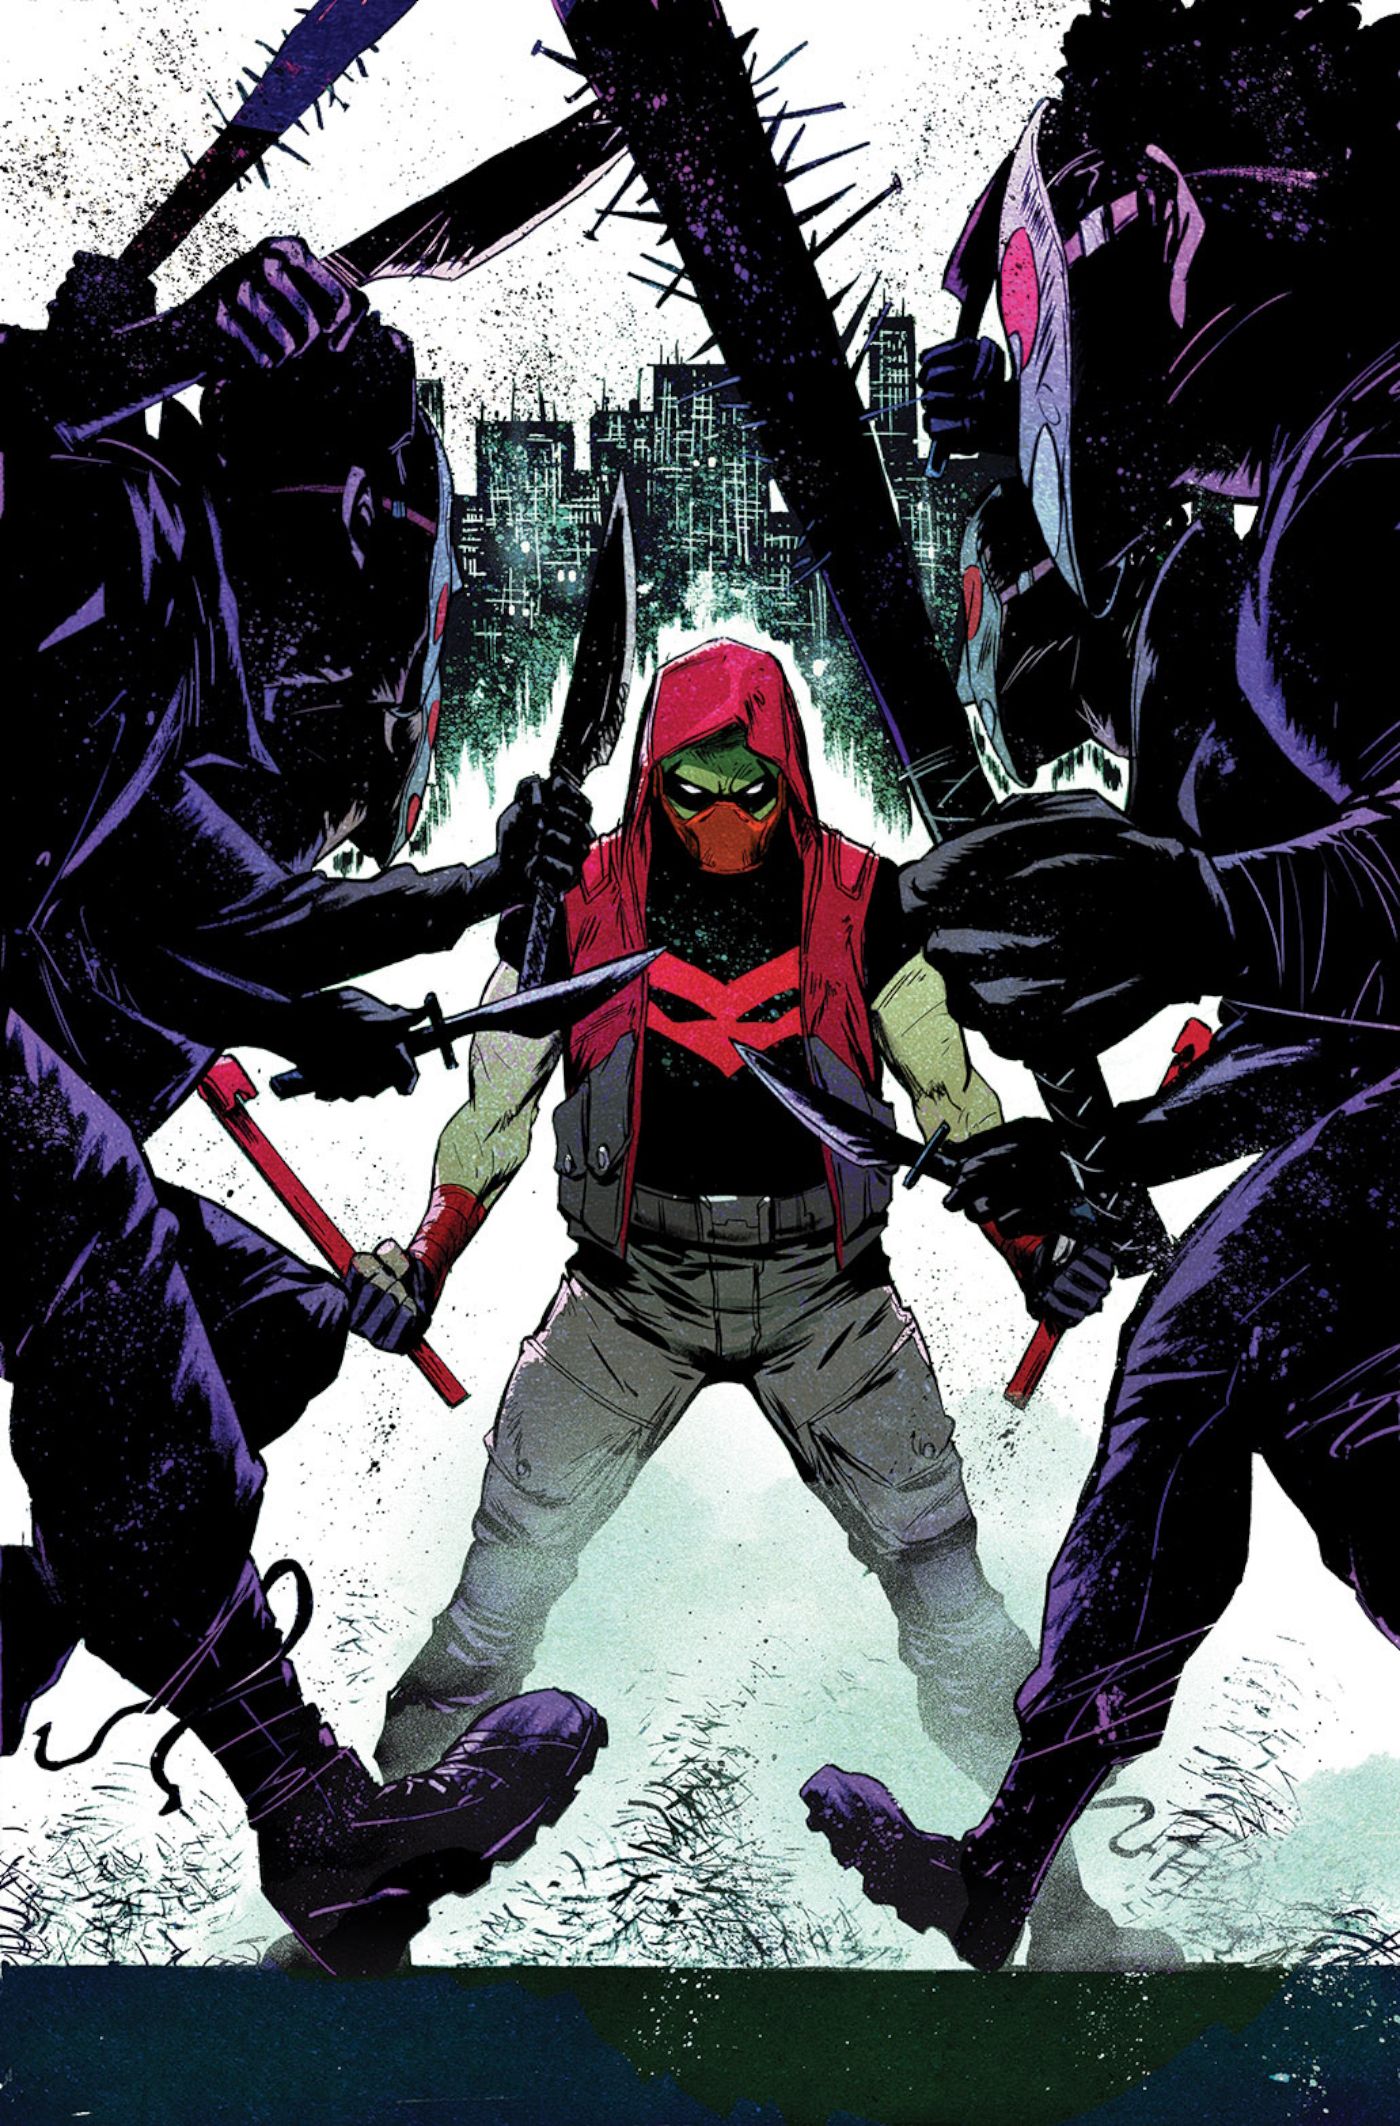 “Welcome to the Hill”: Red Hood Returns to His Old Neighborhood in New Solo Series